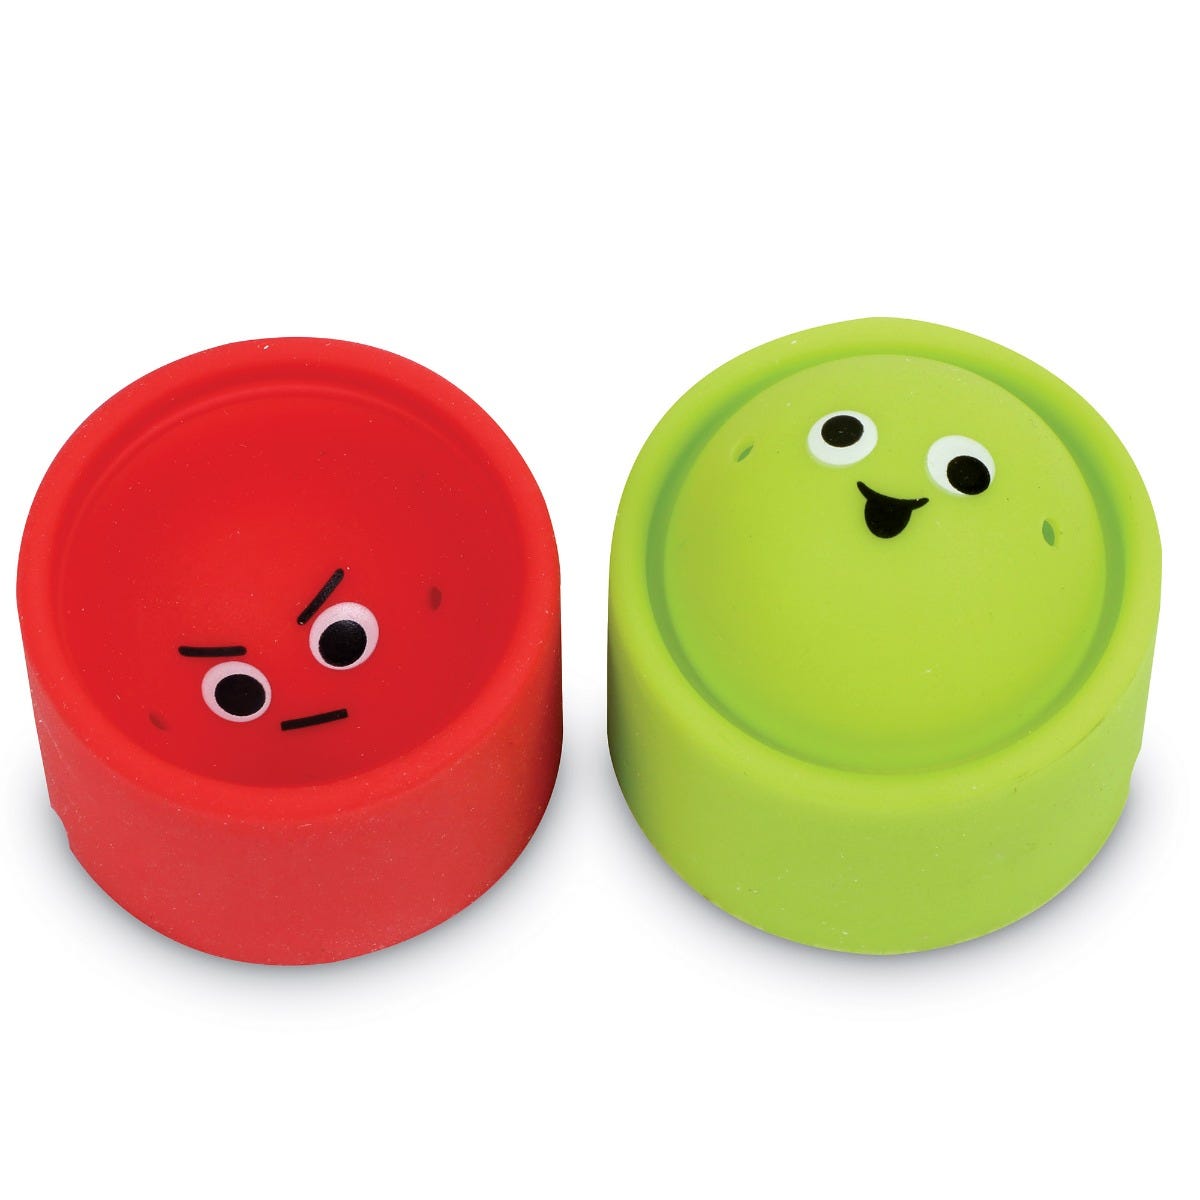 Rainbow Emotion Fidget Poppers, Introducing the Rainbow Emotion Fidget Poppers, the perfect tool to enhance social-emotional learning and sensory skills in children. The Rainbow Emotion Fidget Poppers are crafted from soft silicone and designed with little hands in mind, these captivating fidget poppers are a must-have for every child's fidget toy collection.Featuring a vibrant array of colors, each fidget popper boasts a delightful surprise – one of five expressive emoji-style faces that assist children in